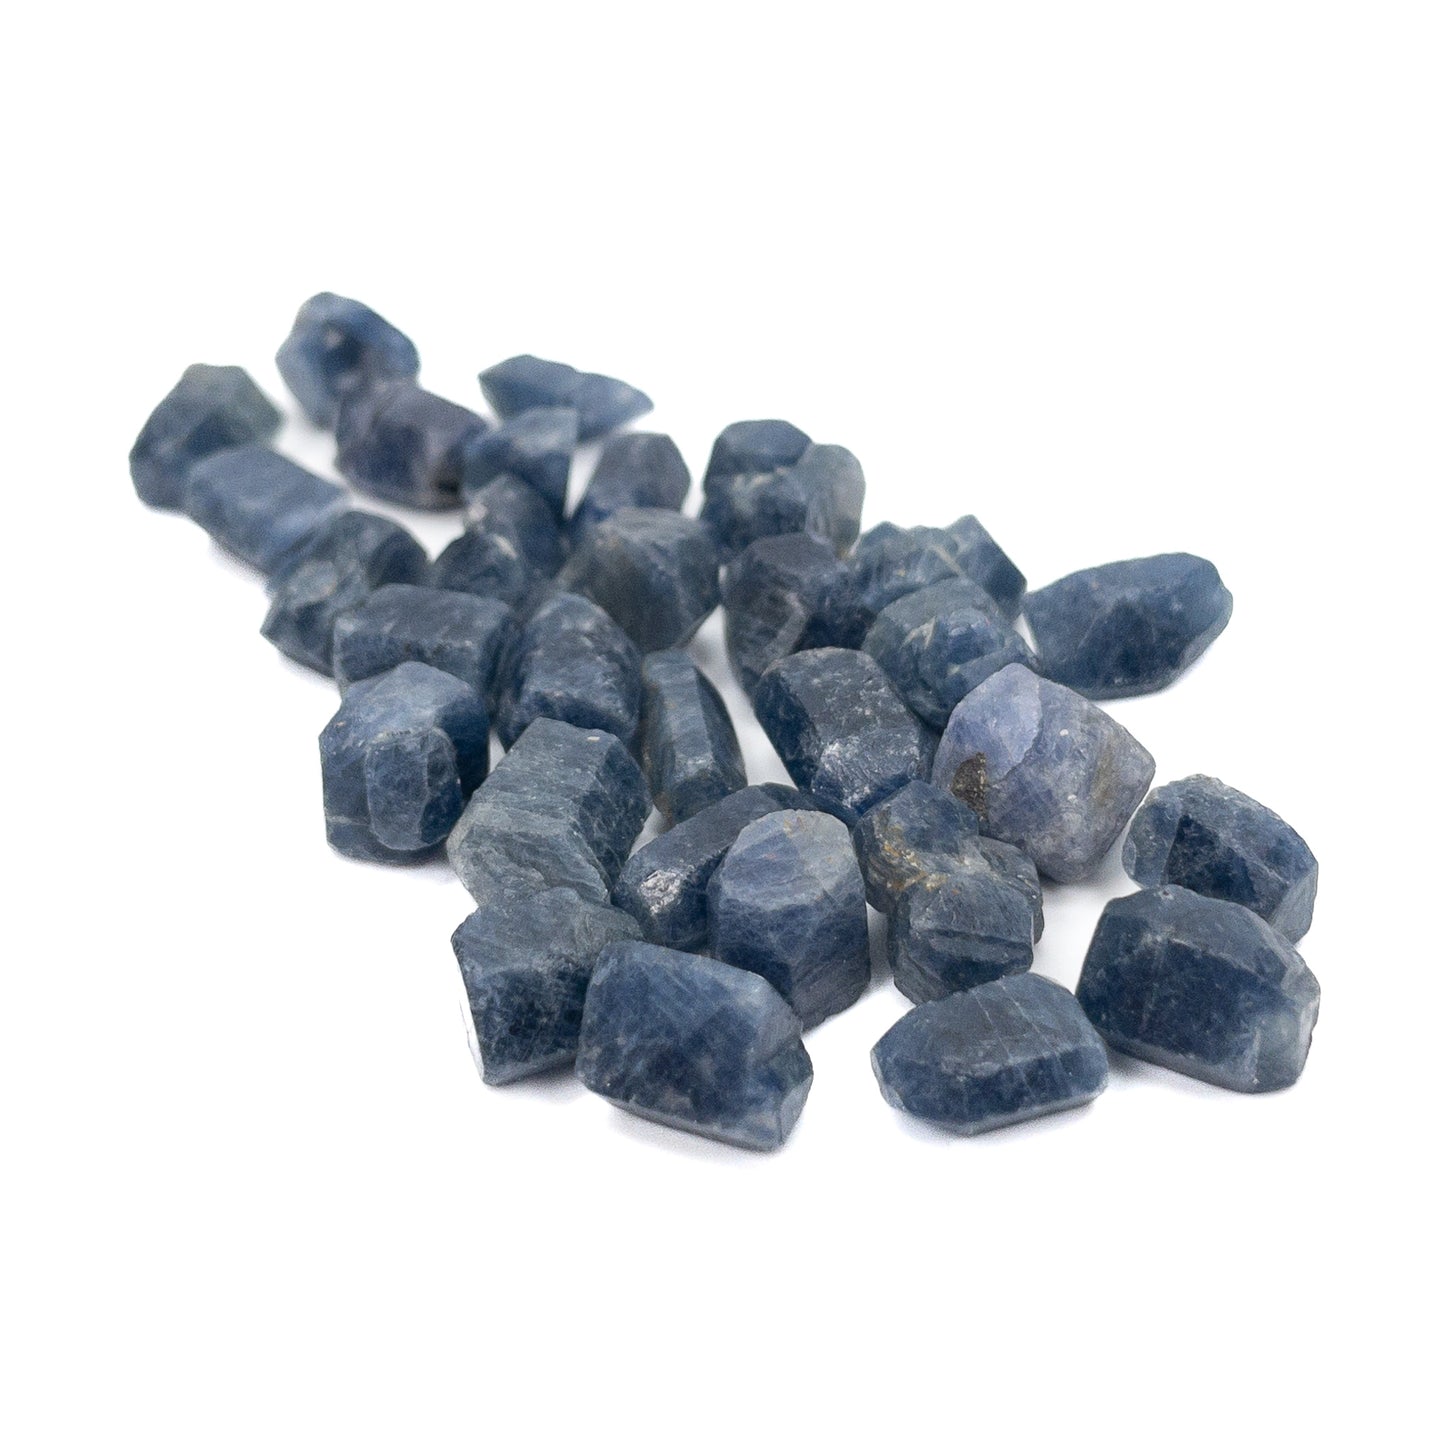 Natural Blue Sapphire Raw Crystal Specimen (2 Options Available) - 1 pc.